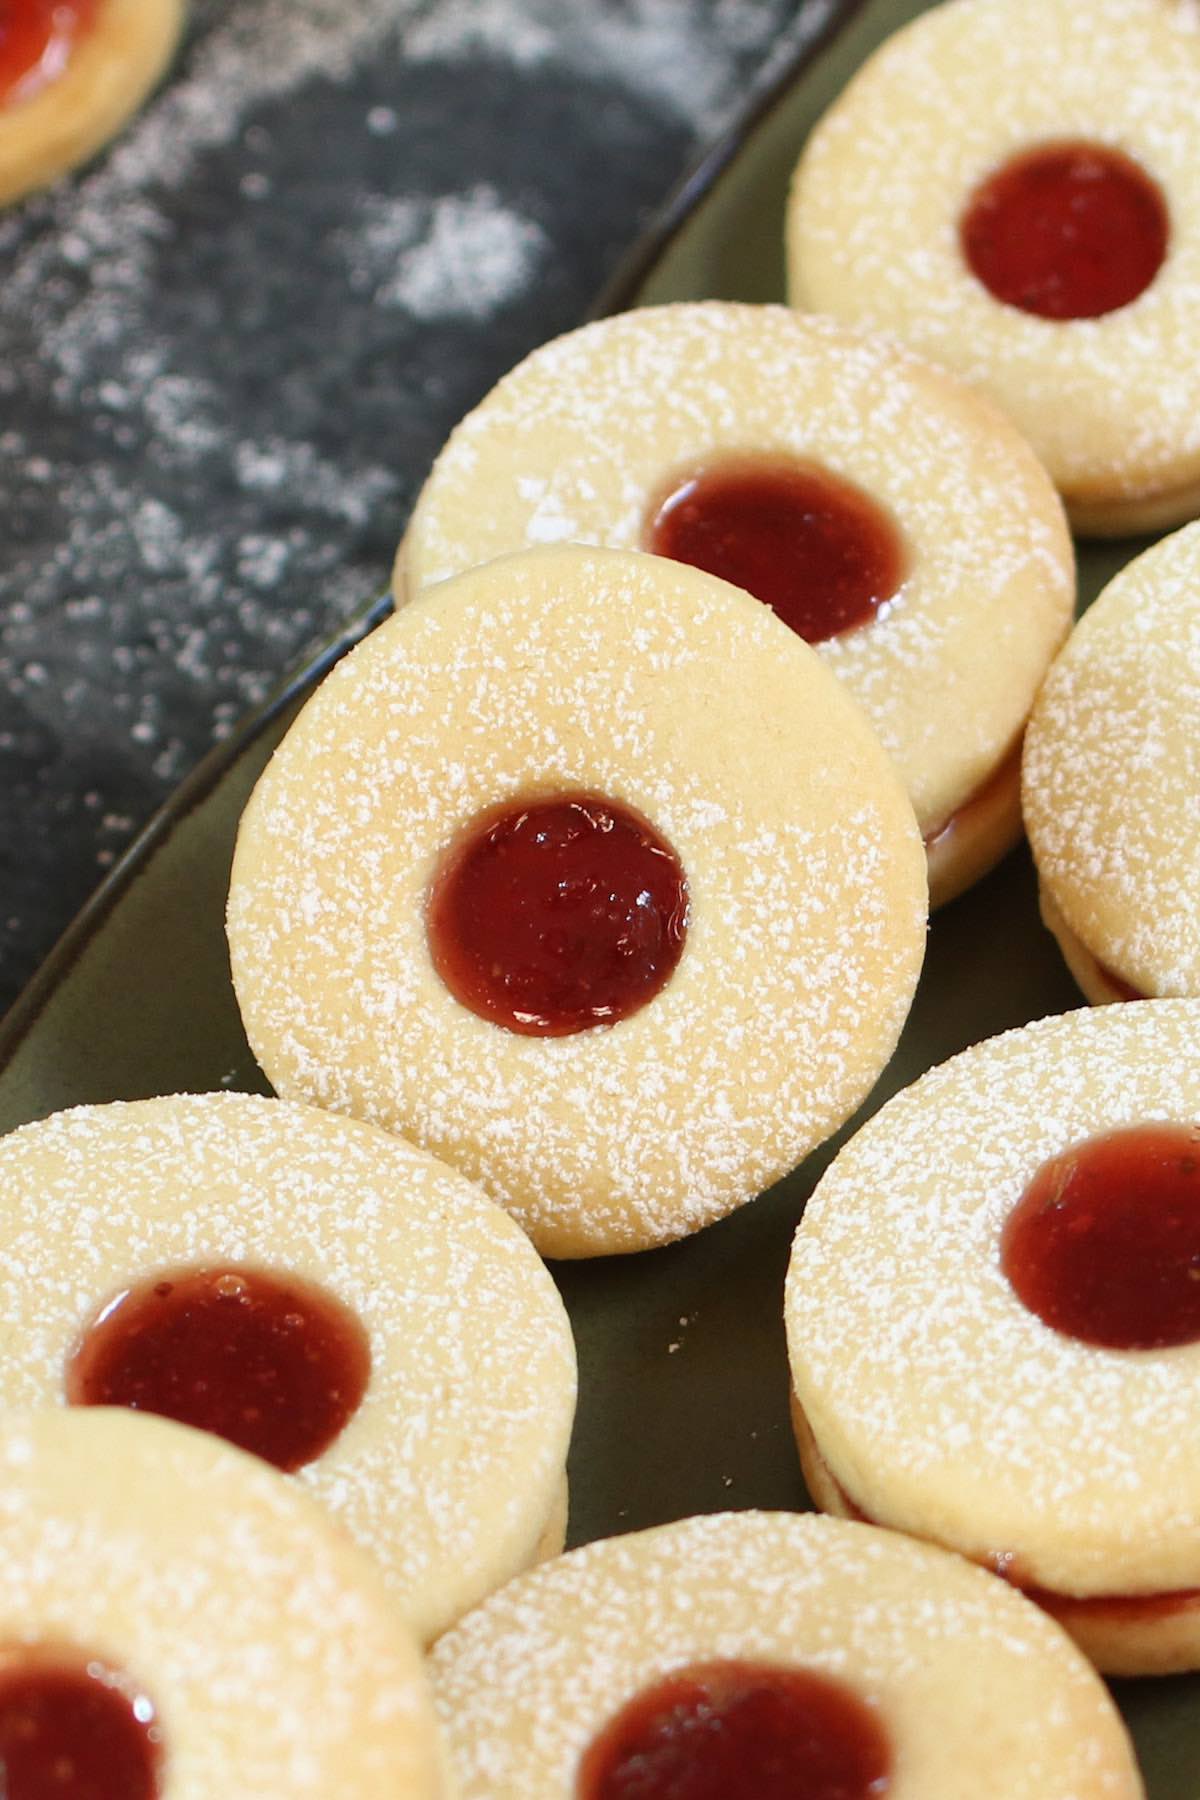 These soft and buttery homemade Jammie Dodgers are a UK staple! They are two shortbread biscuits sandwiched together with fruity jam such as strawberry or raspberry.